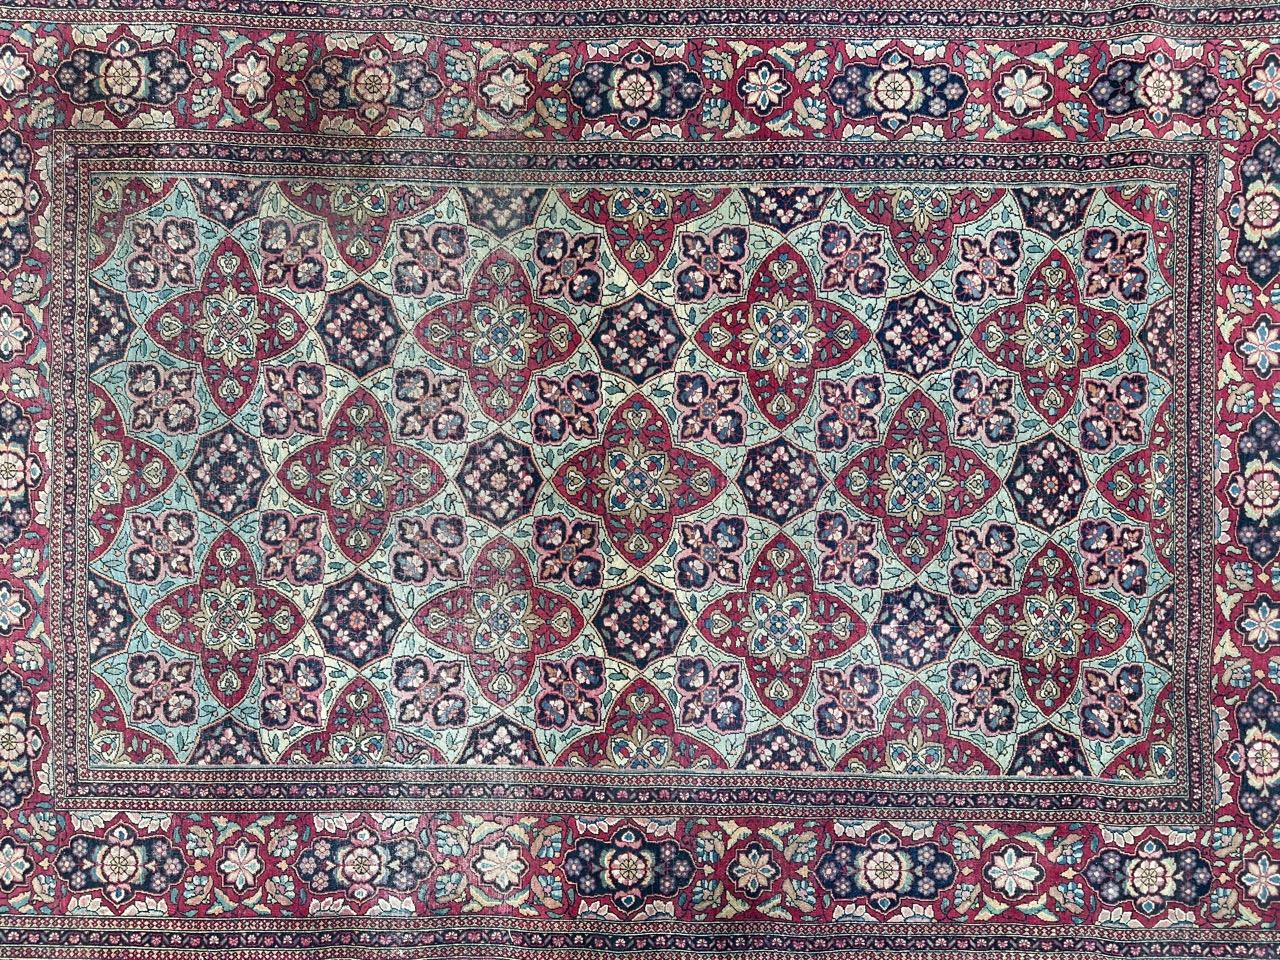 Exquisite antique Tehran rug, meticulously handwoven in fine wool on a cotton foundation, dating back to the late 19th century. This masterpiece features beautifully stylized floral designs in a stunning array of natural colors.

Set against a light